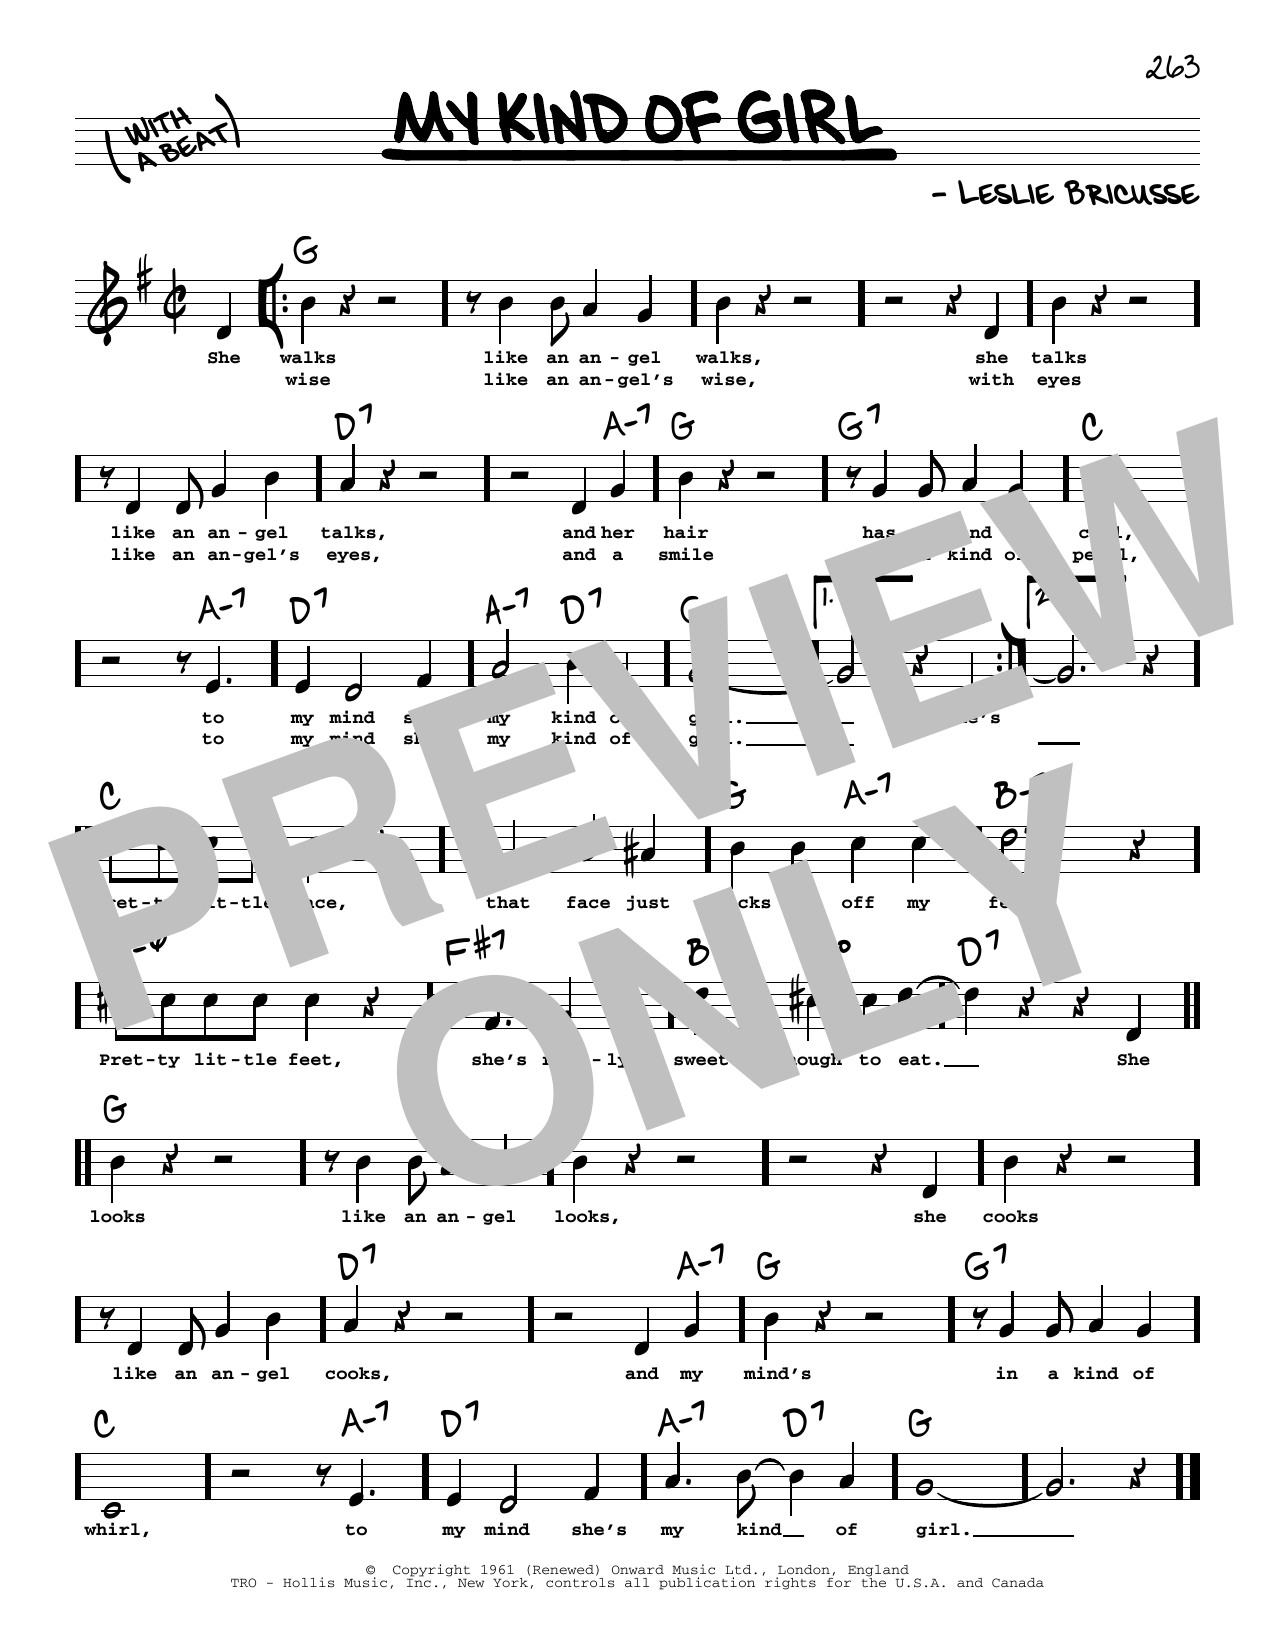 Download Leslie Bricusse My Kind Of Girl (High Voice) Sheet Music